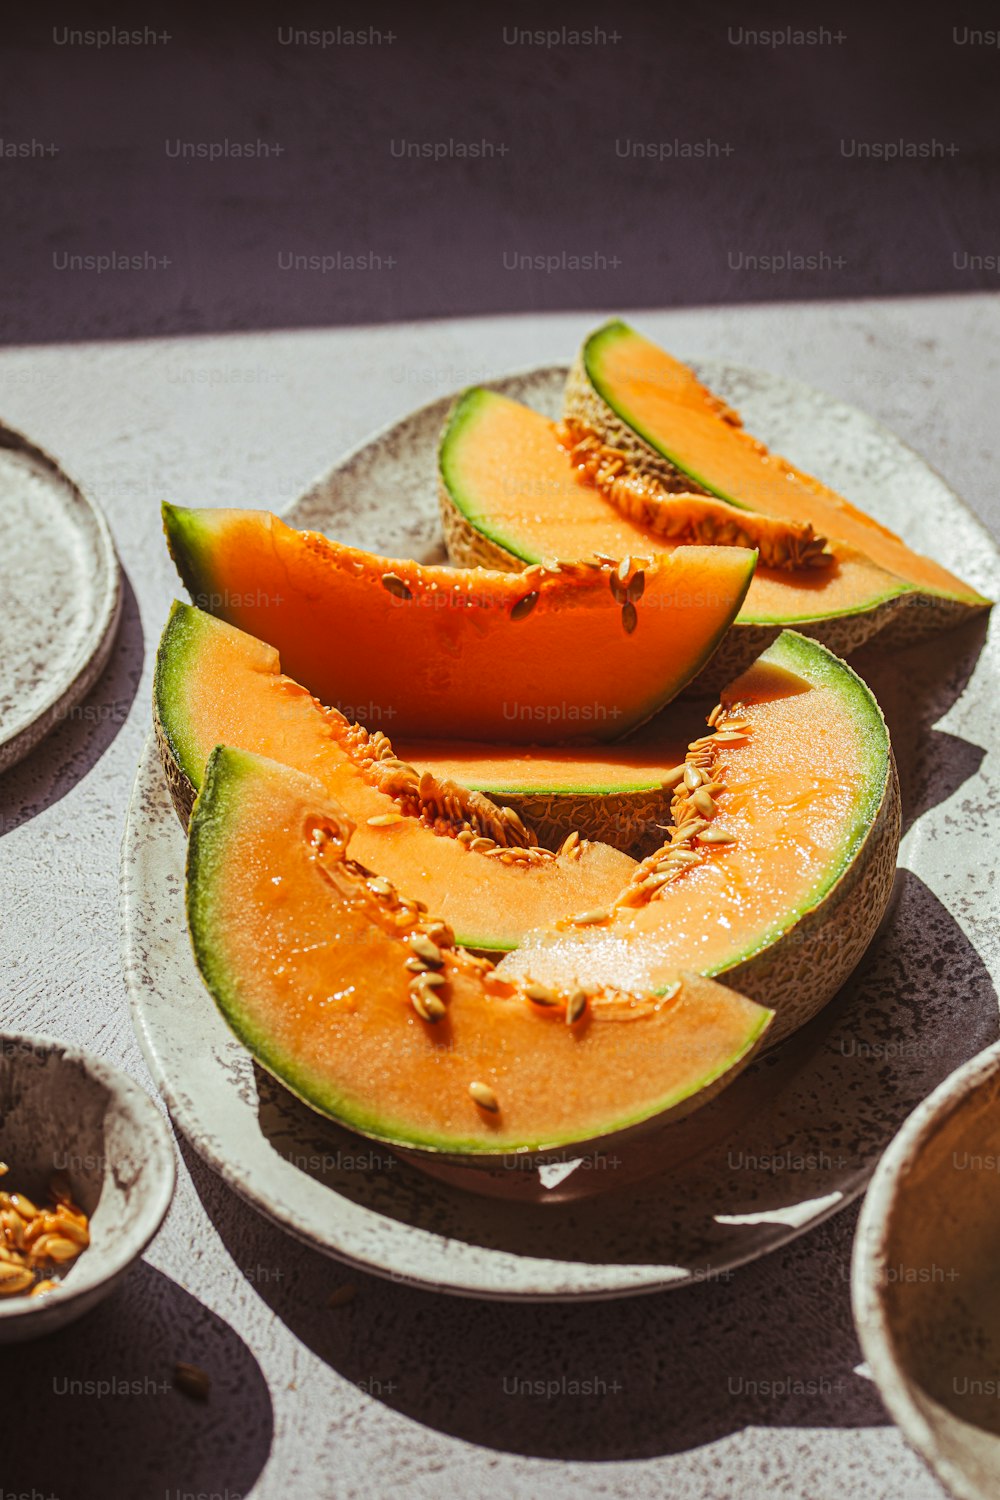 slices of melon on plates on a table